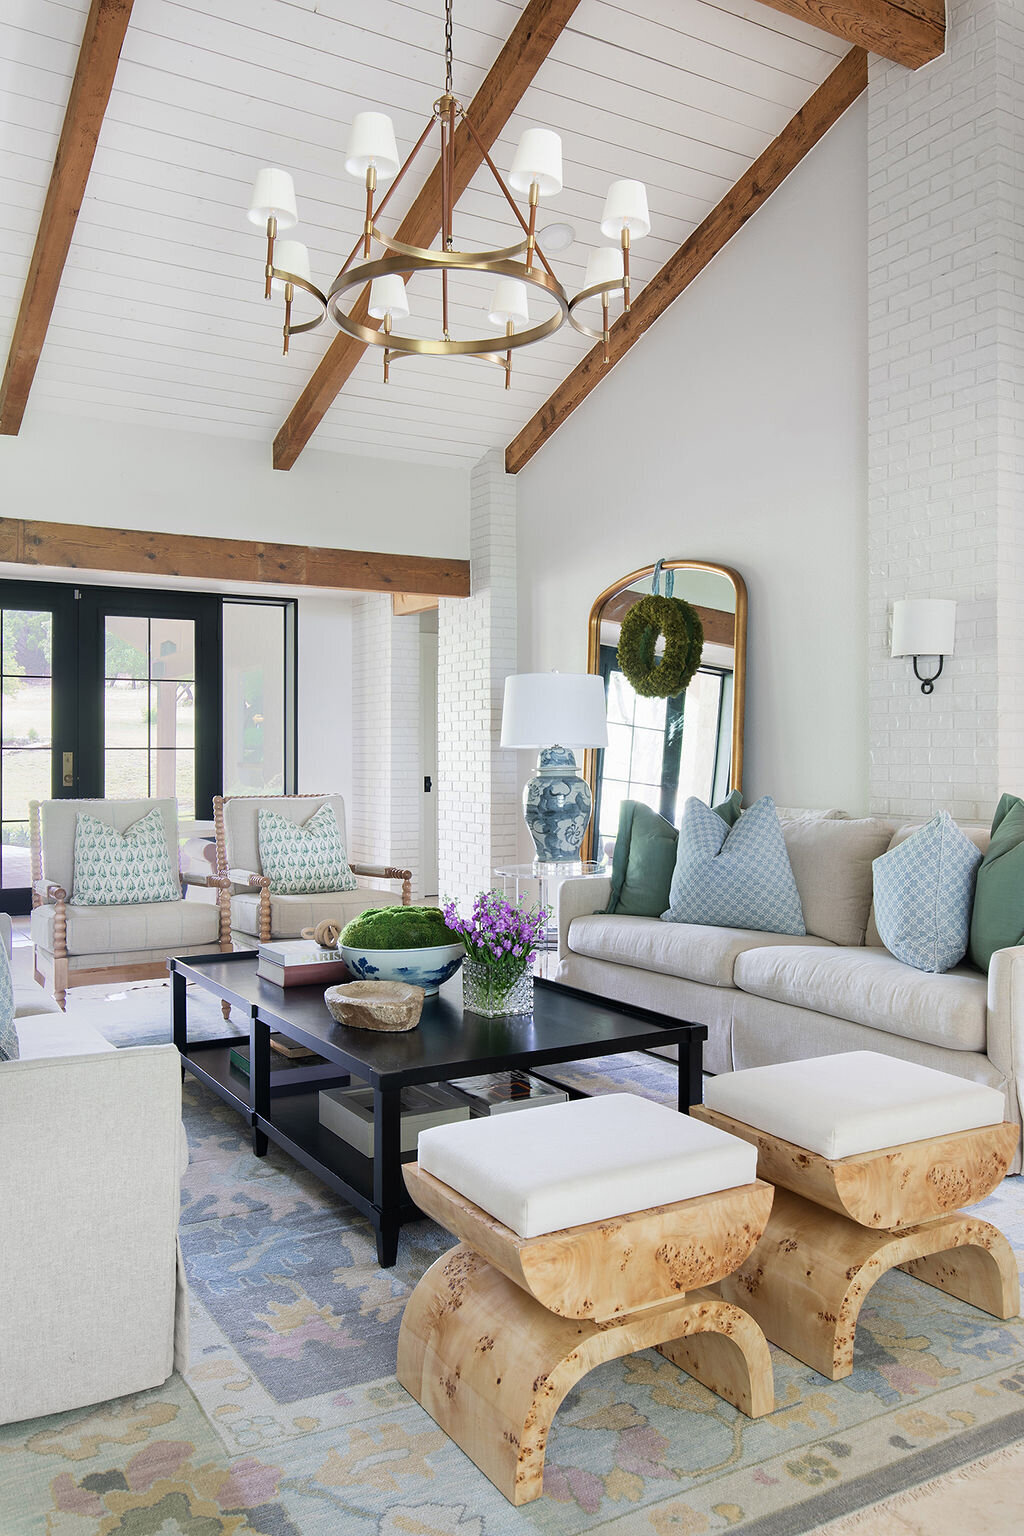 living room with high ceilings that have exposed wood beams